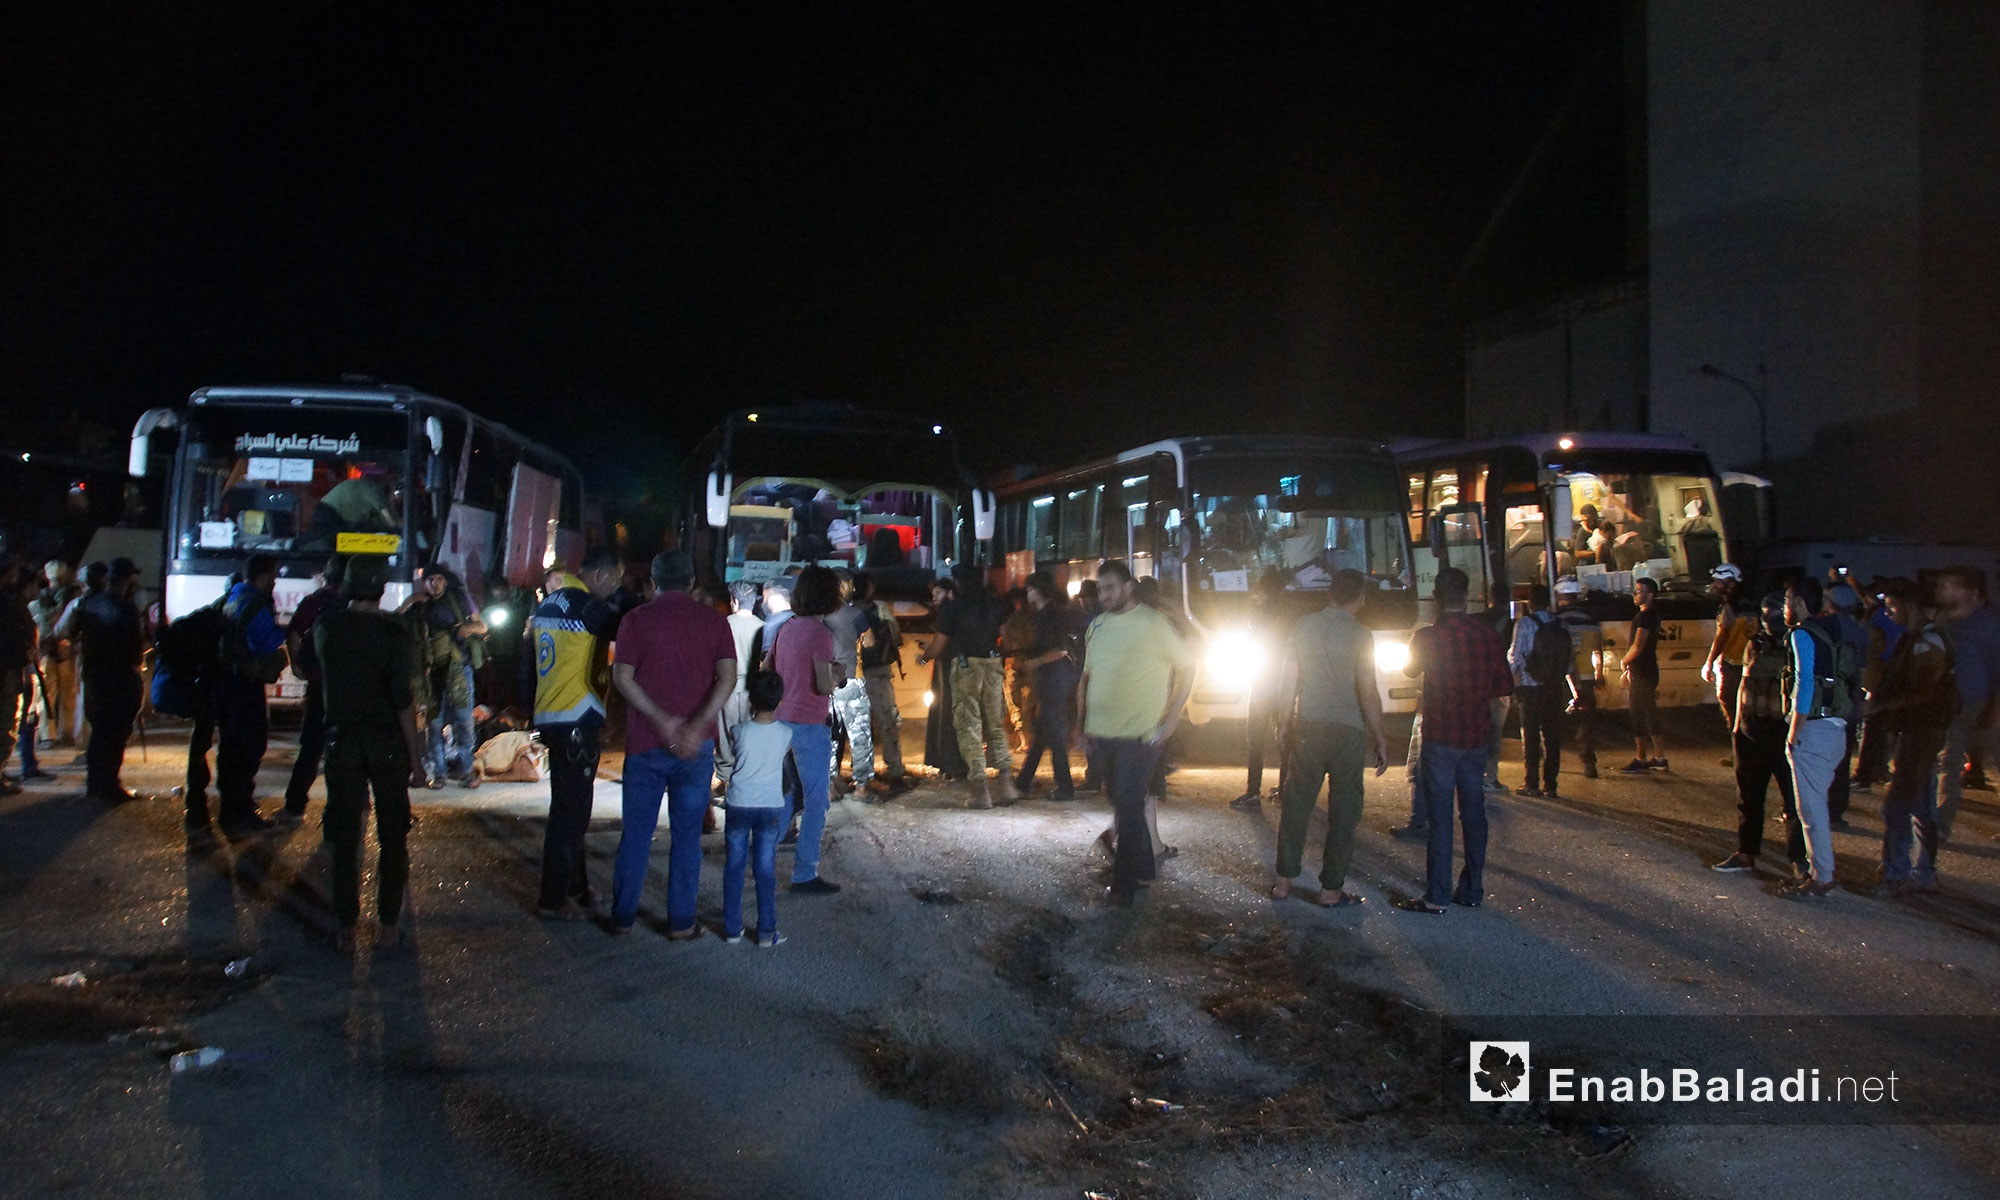 The arrival of the first batch of Daraa IDPs in the city of Qalaat al-Madiq, rural Hama – July 16, 2018 (Enab Baladi)